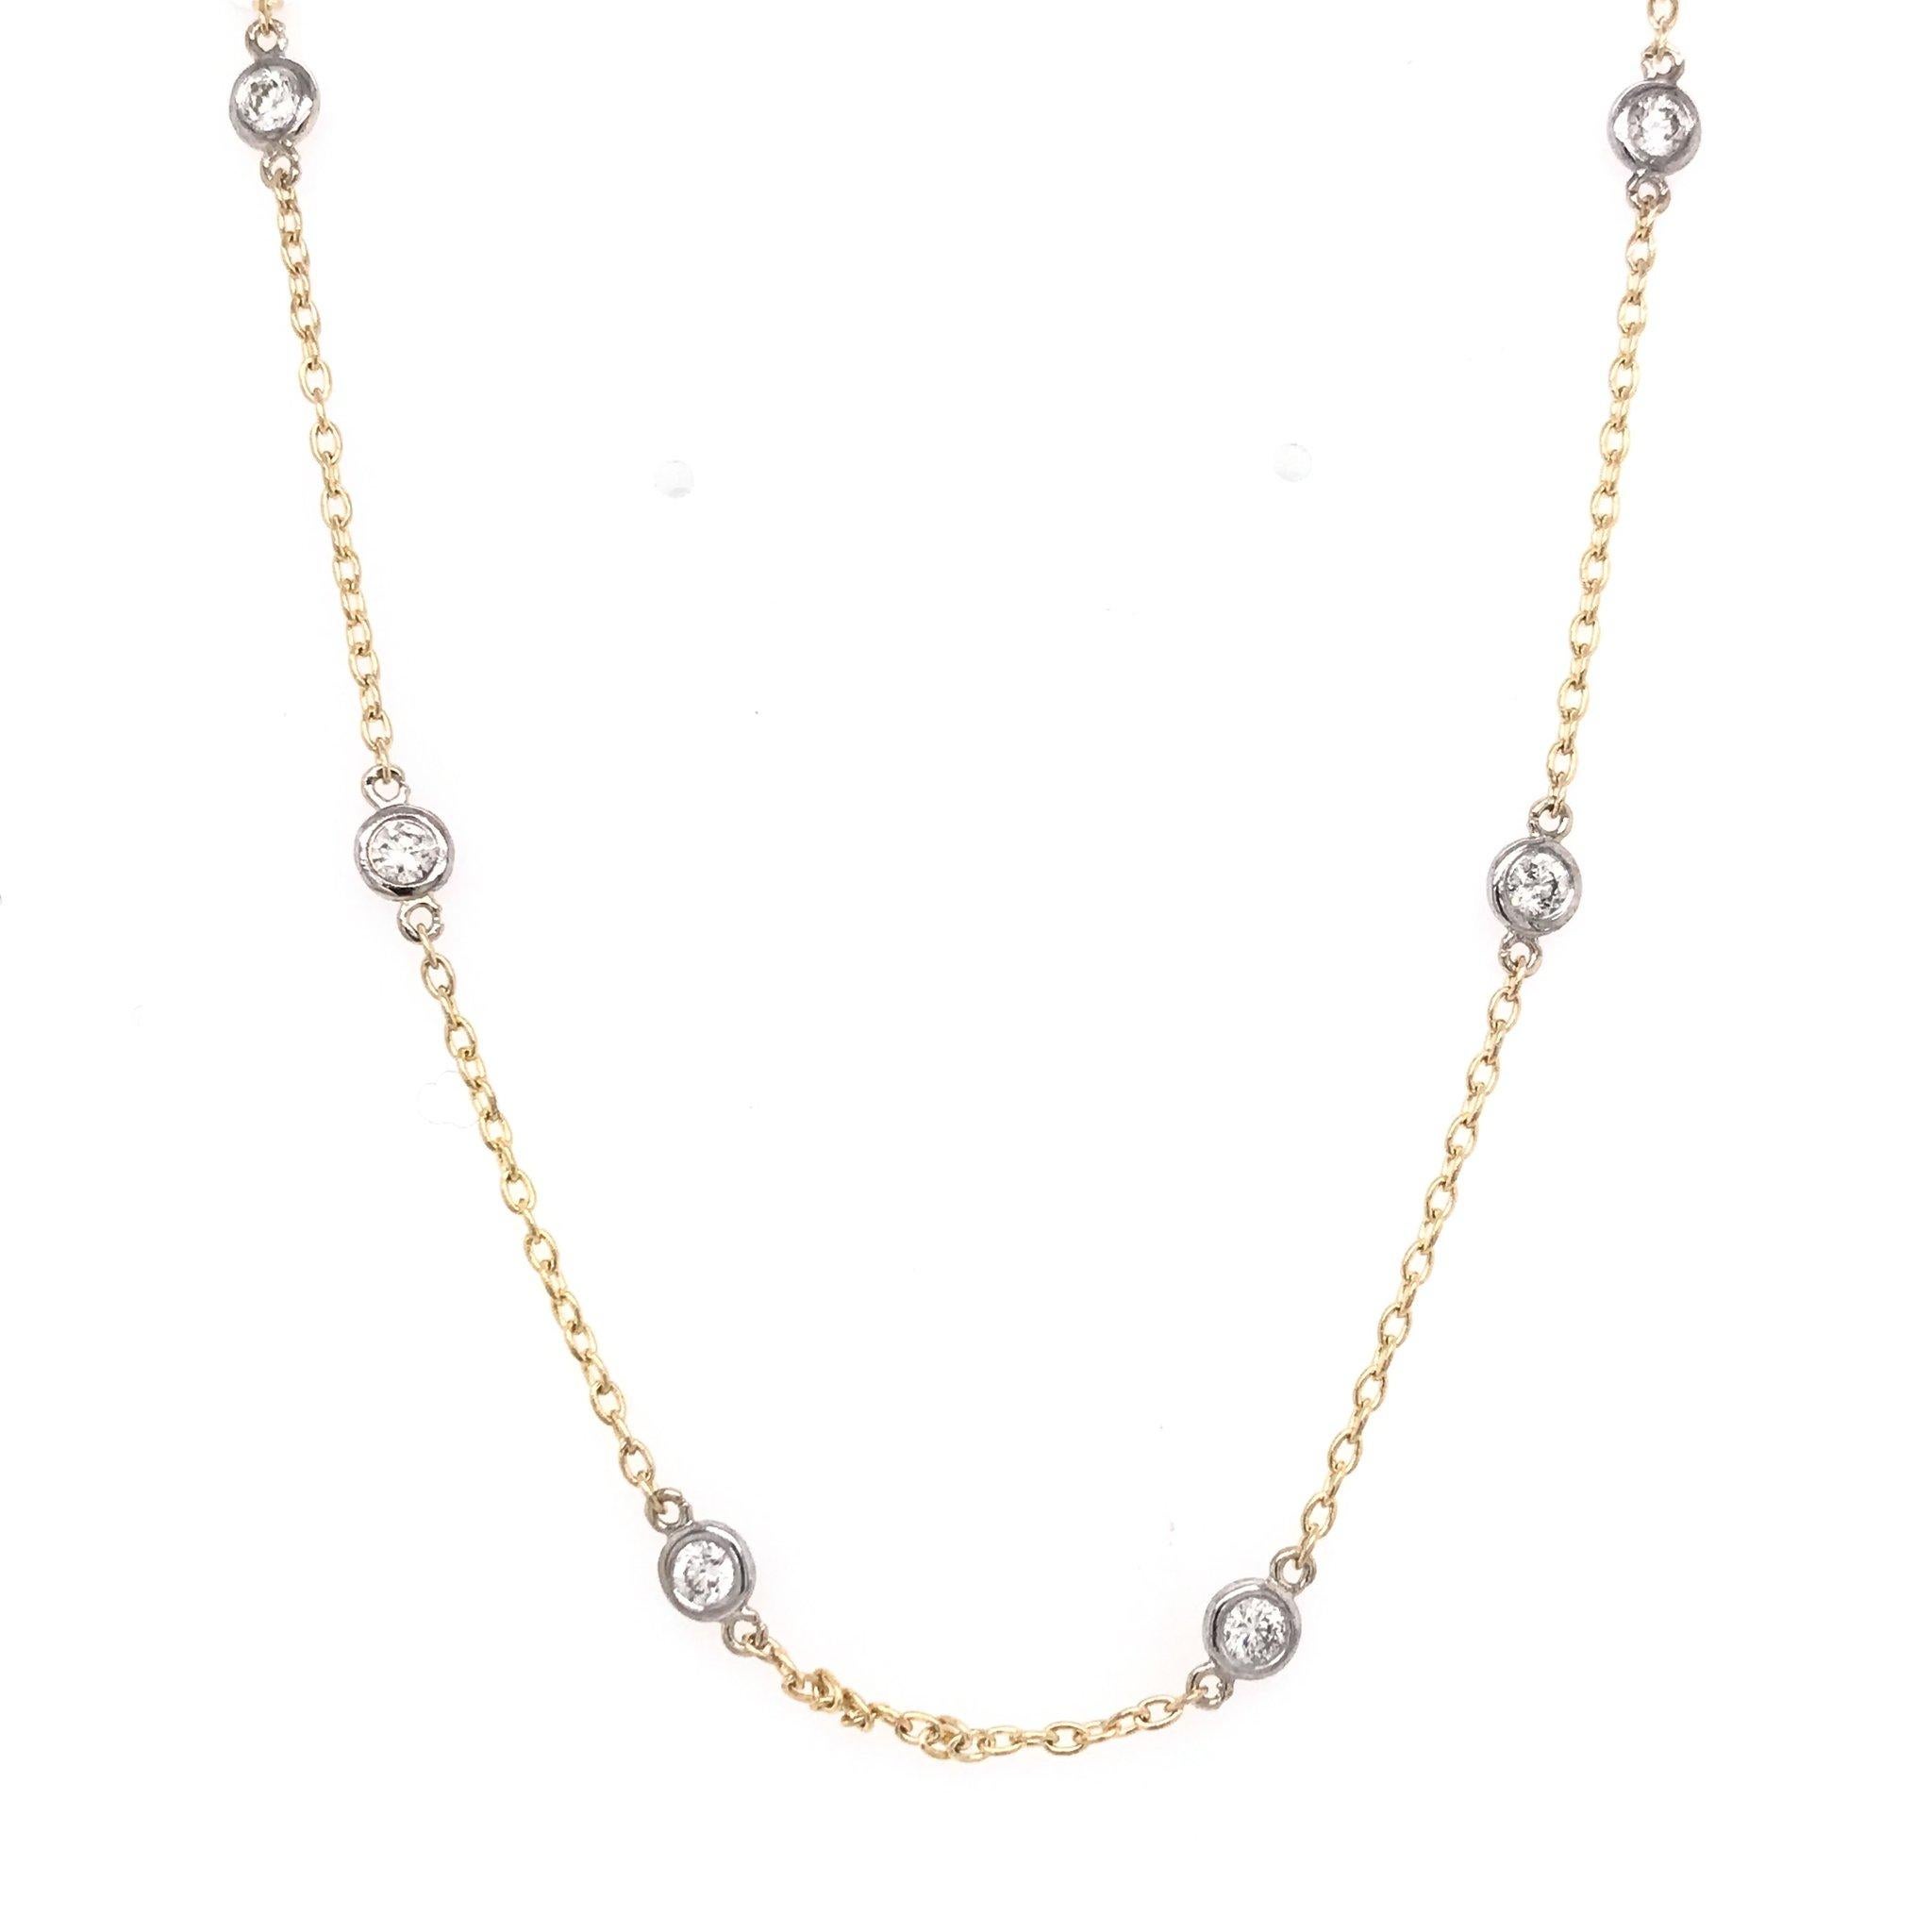 This contemporary piece is new and has never been worn. The chain is 14k yellow gold and features 15 sparkling white diamonds, set in the popular by the yard style. The diamonds are bezel set in 14k white gold and their combined total weight